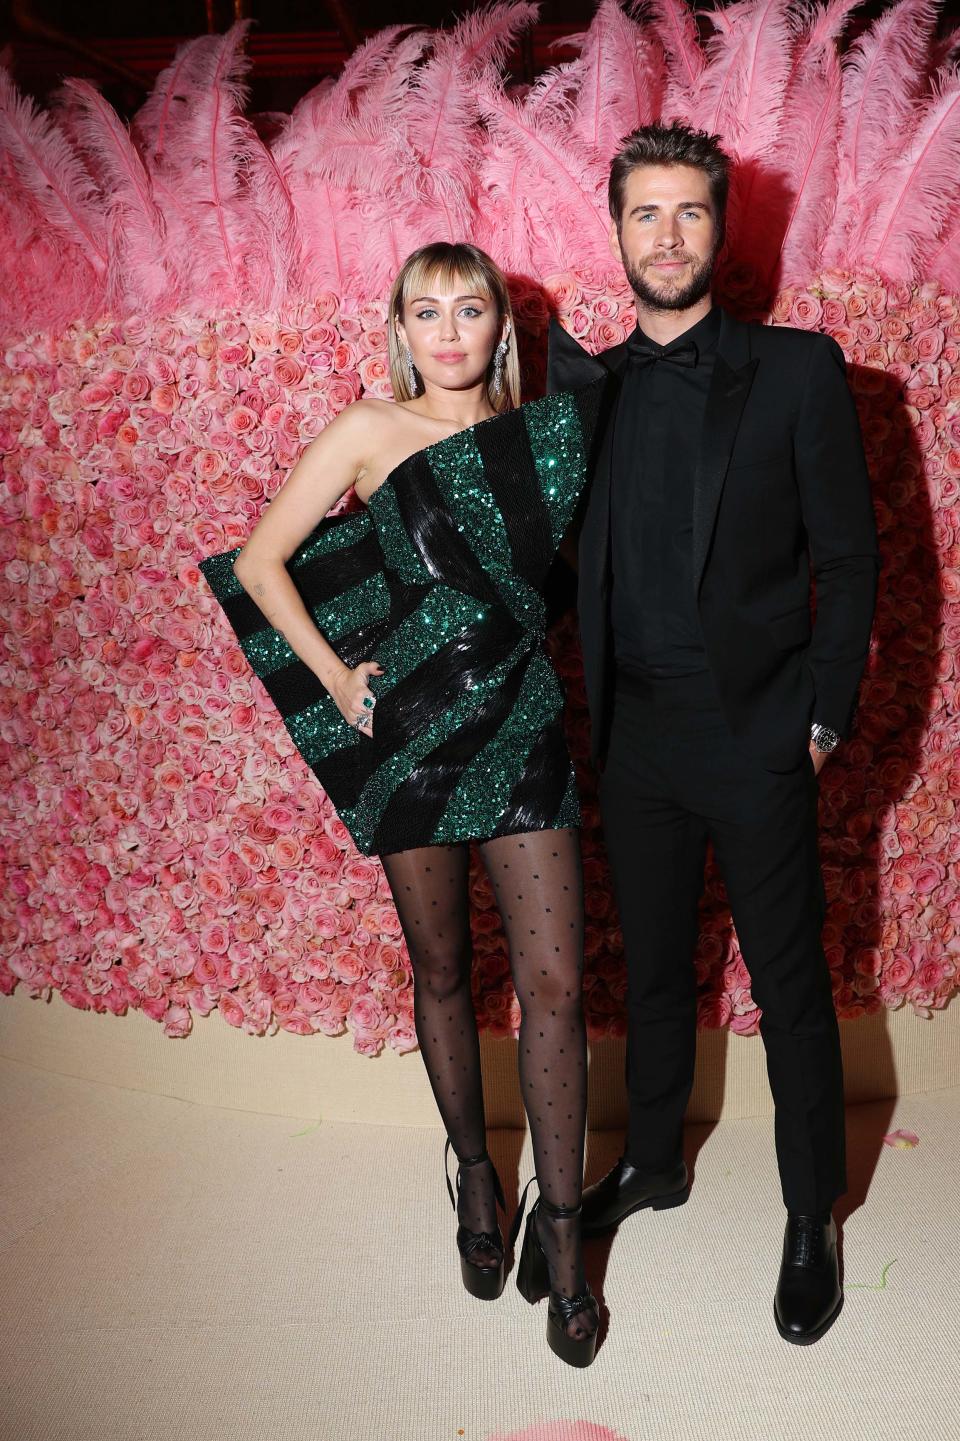  Miley Cyrus and Liam Hemsworth (Kevin Tachman/MG19 / Getty Images for The Met Museum/Vogue)